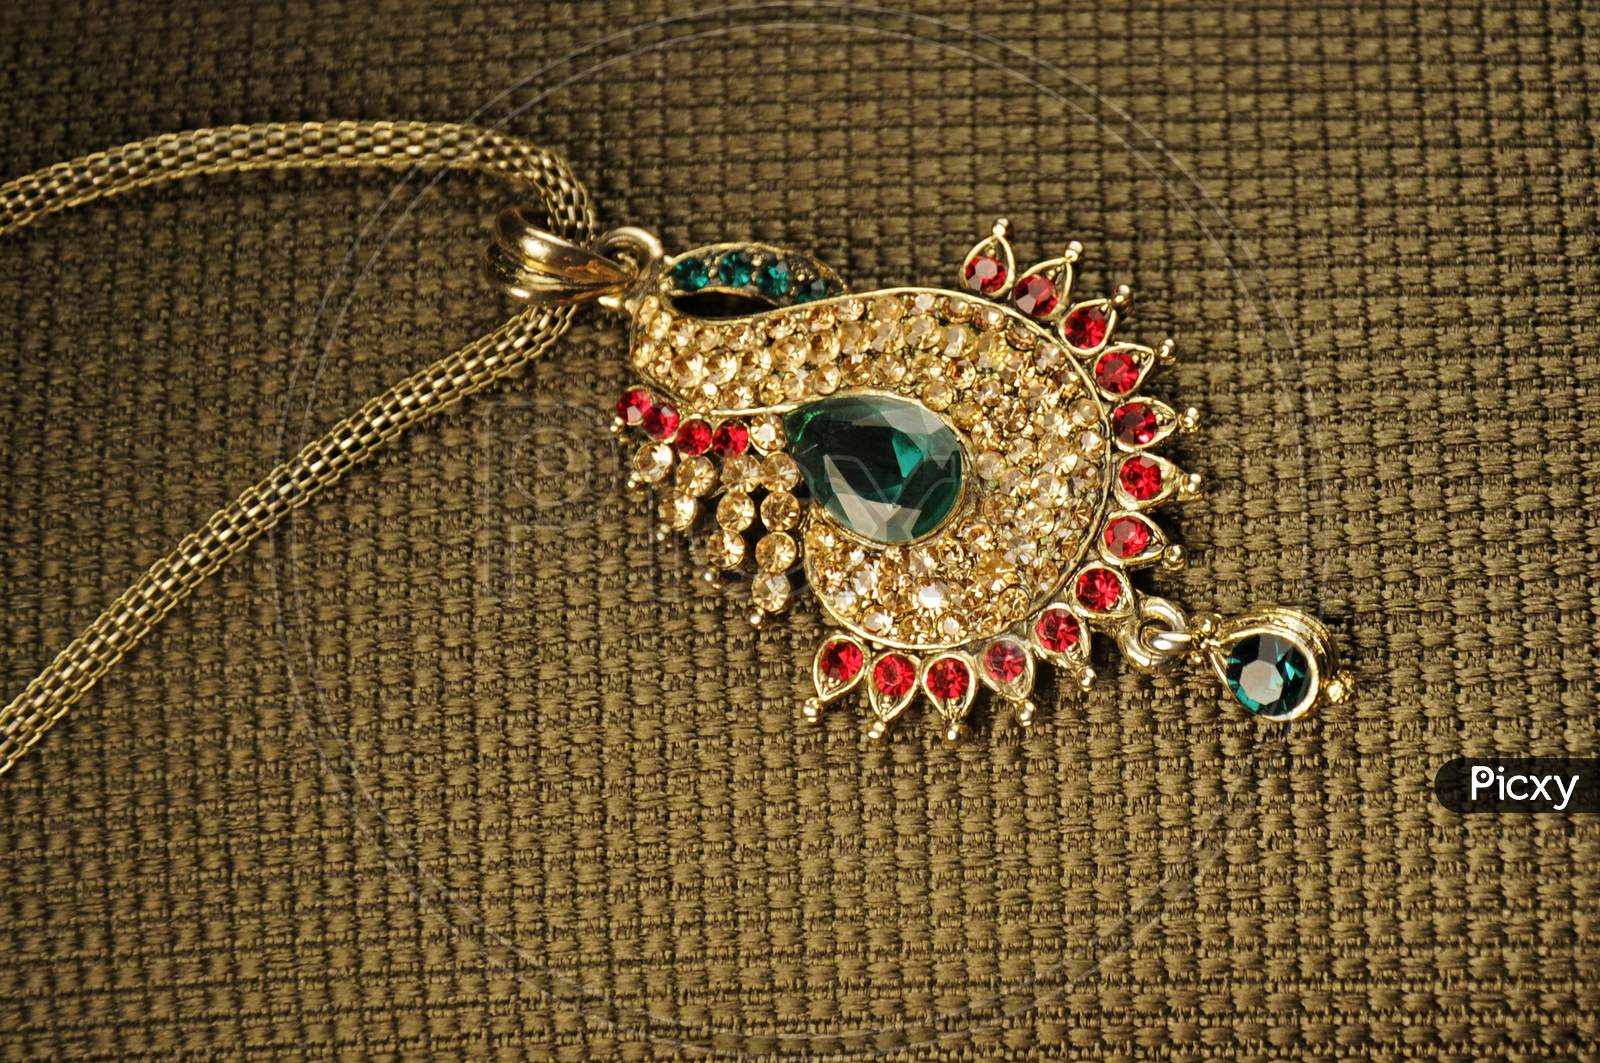 Diamond Pendant With Chain, Indian Traditional Jewelry